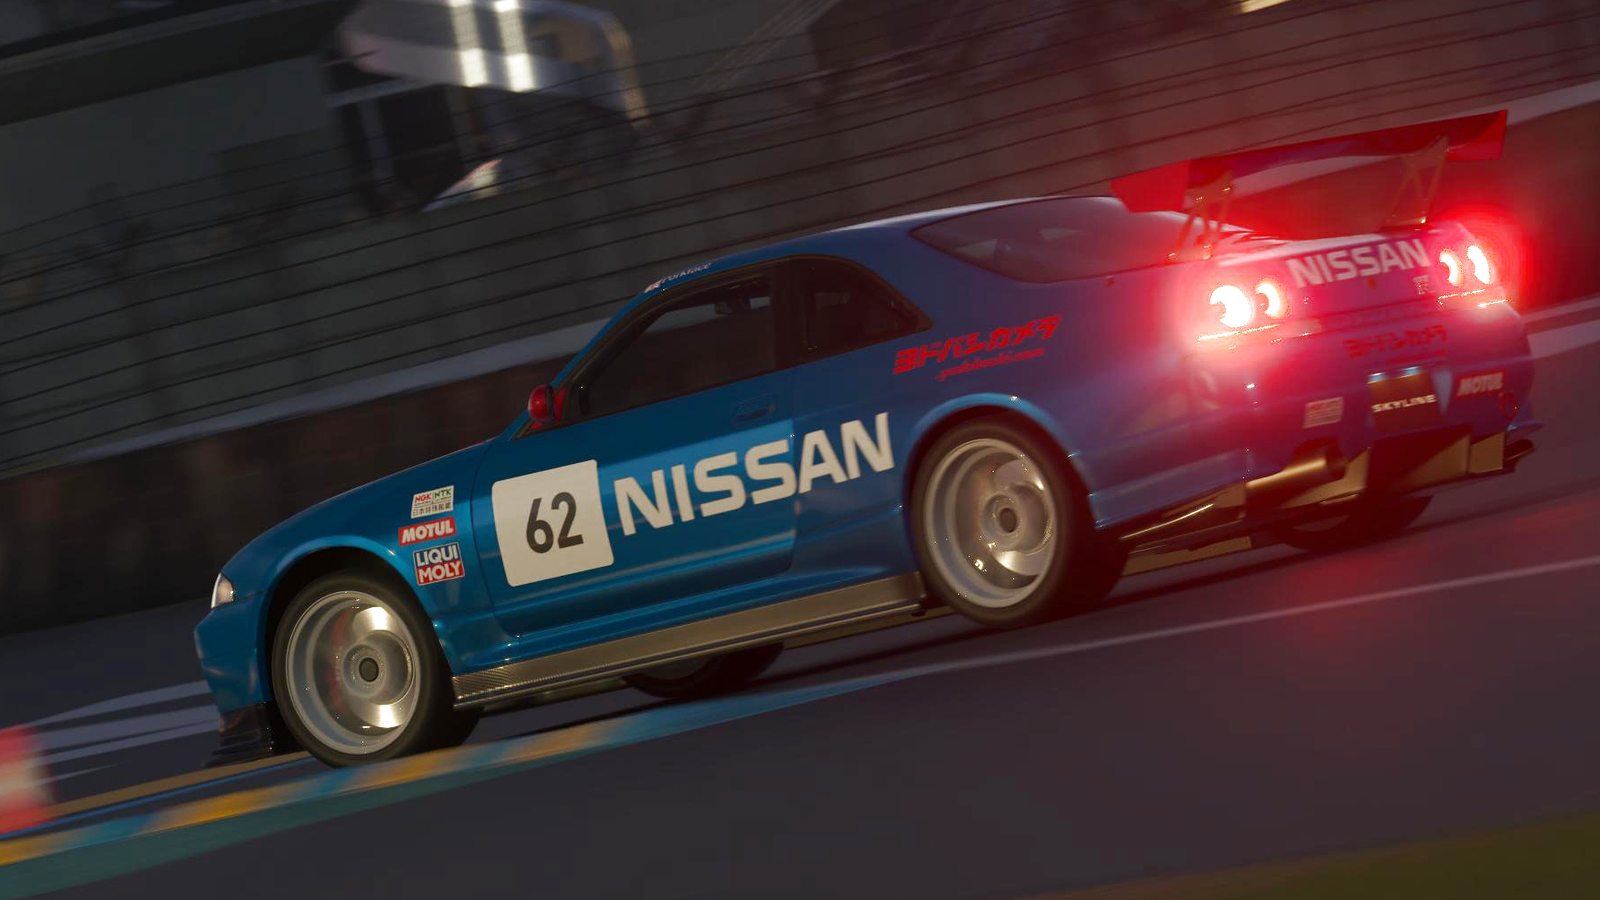 Gran Turismo 7 players get 1M free credits after backlash over downtime,  grind - Polygon